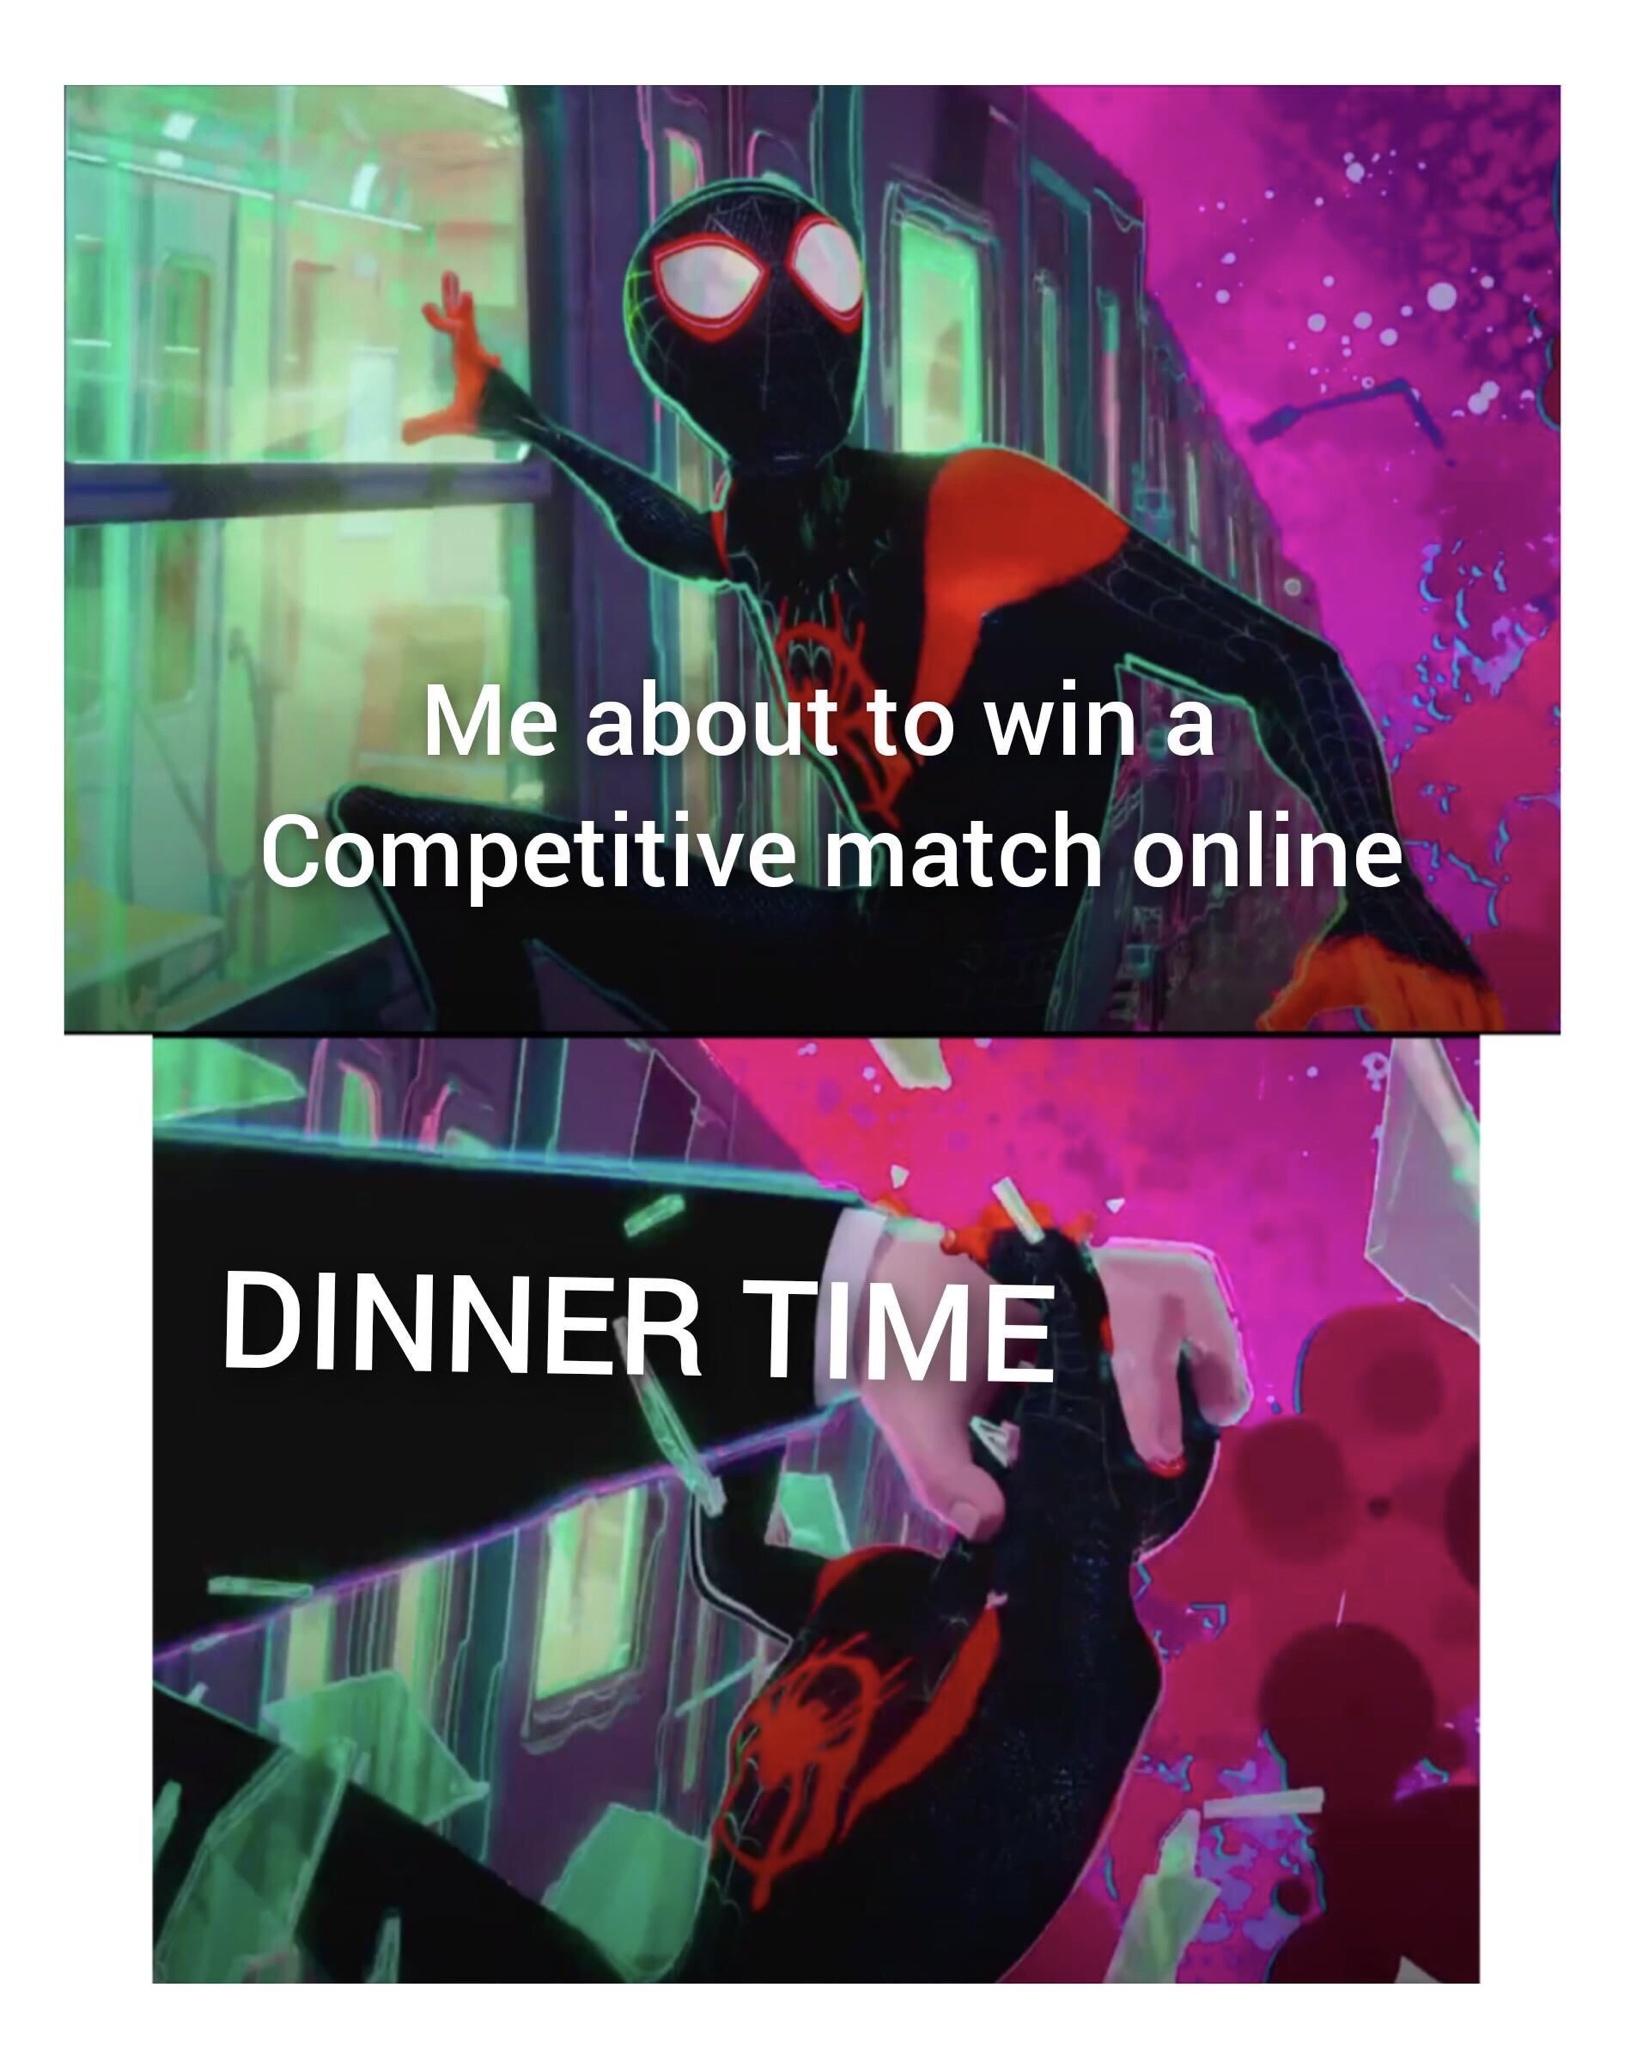 funny gaming memes - graphic design - Me about to win a Competitive match online Dinner Time